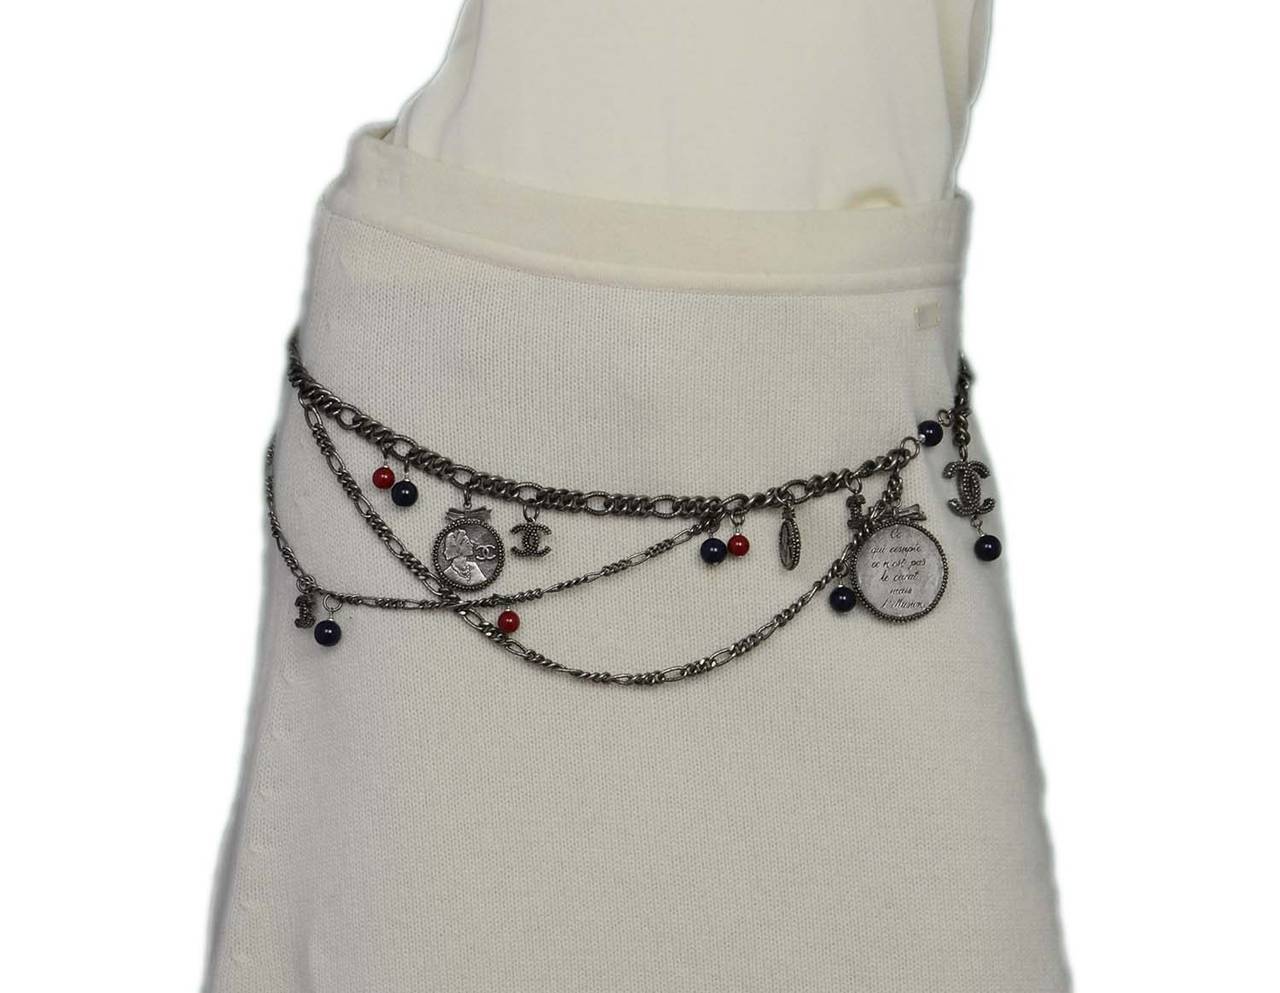 CHANEL Antiqued Silver Chain Link Belt W/ CC Cameo Charms and Red & Navy Beads 4